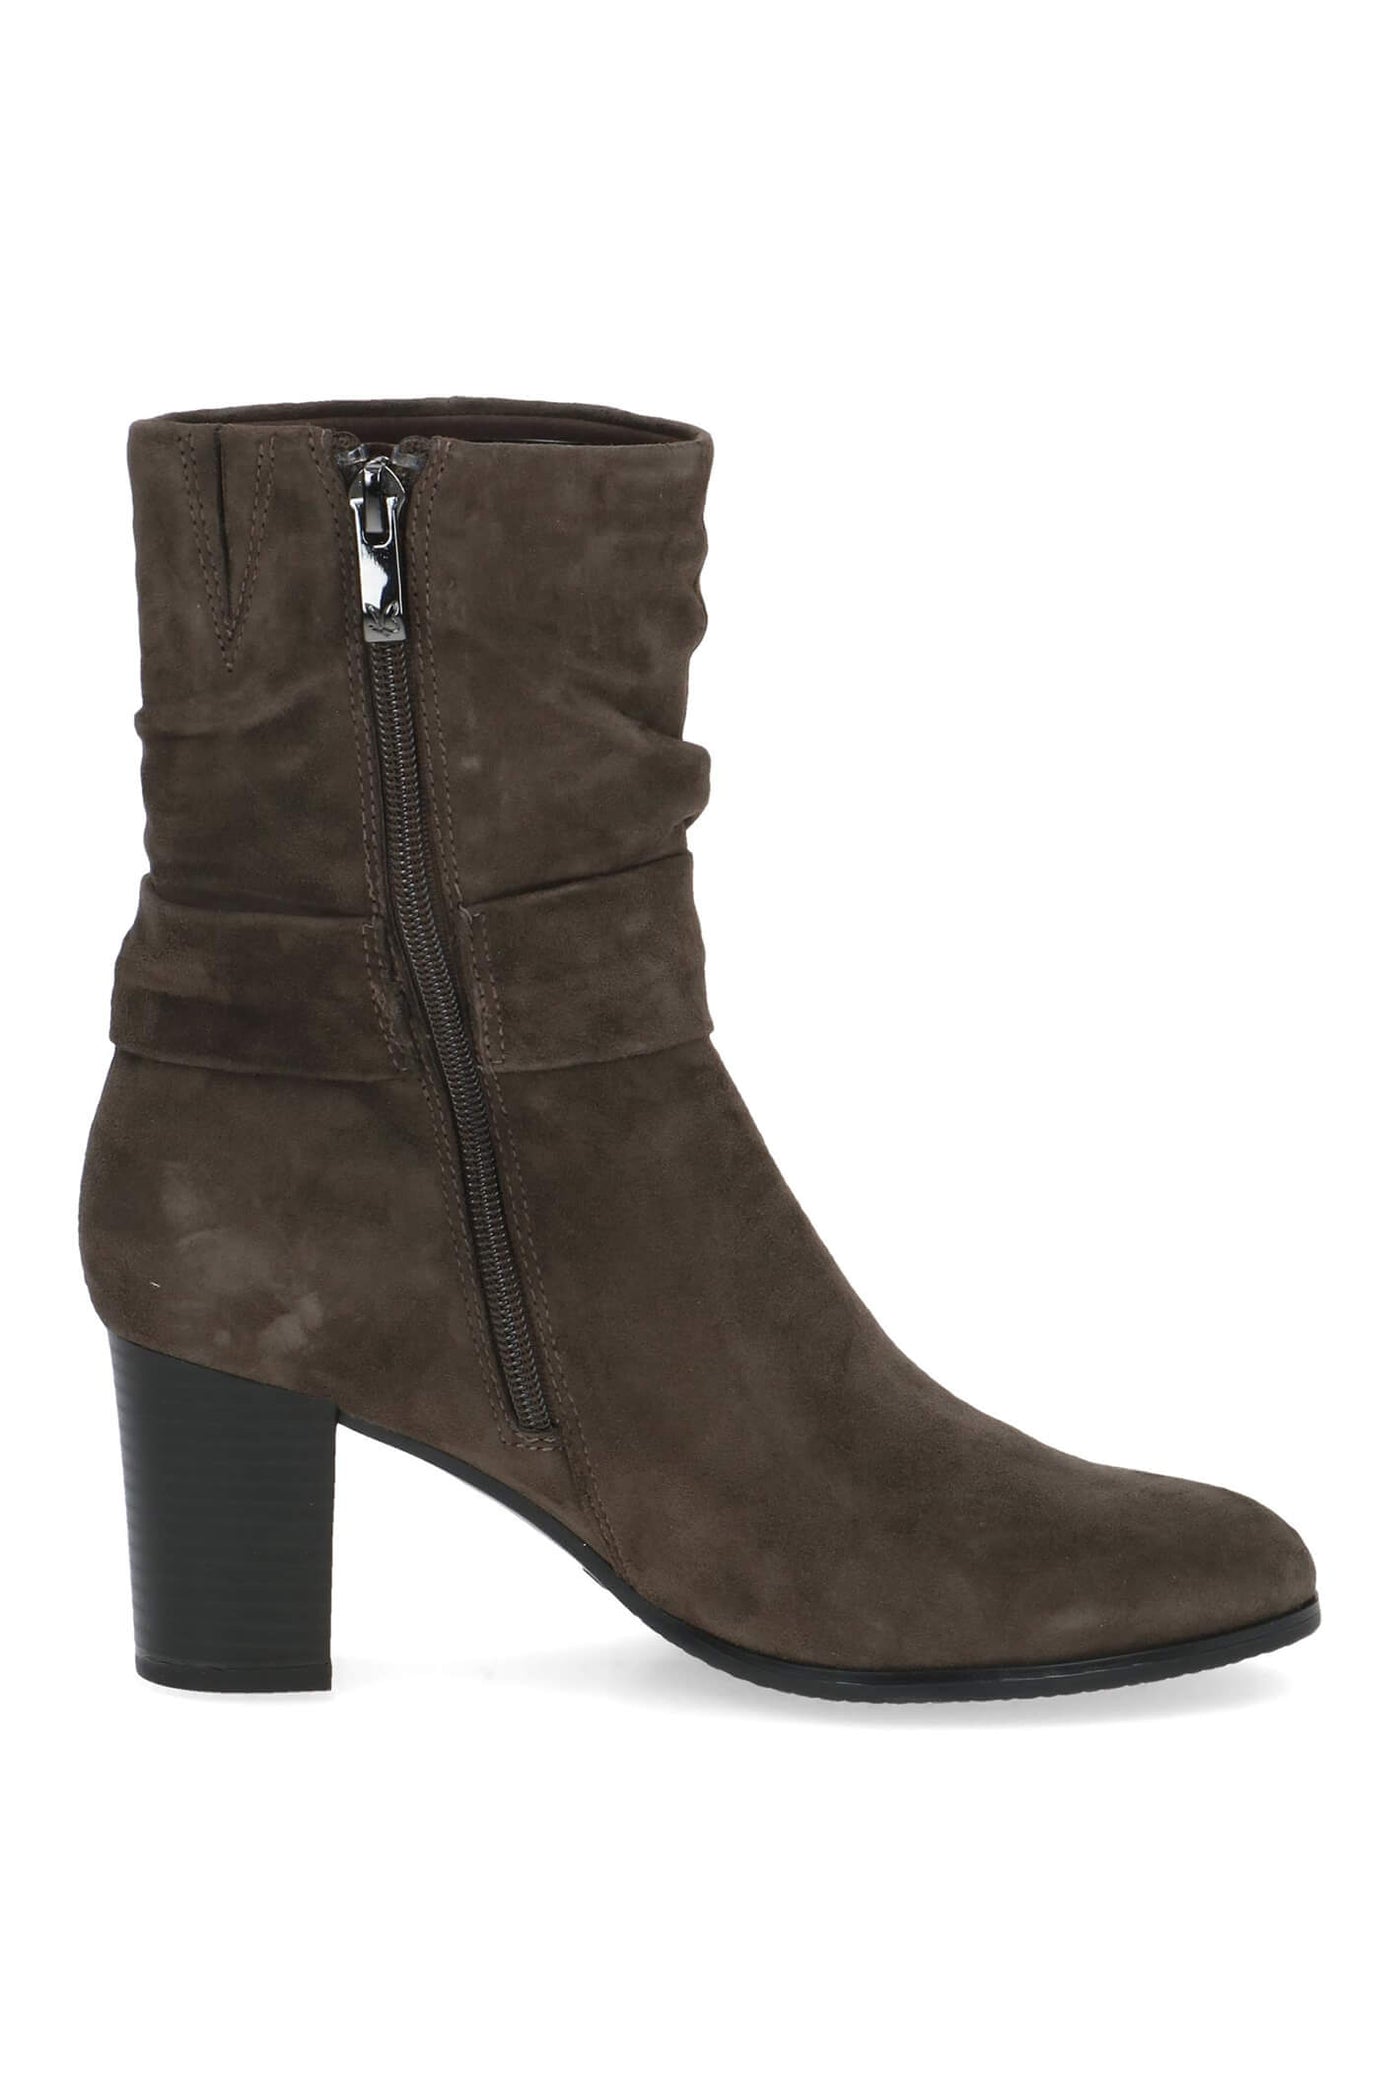 Caprice Verdana 9-25328-41-225 Stone Brown Suede Boots - Rouge Boutique